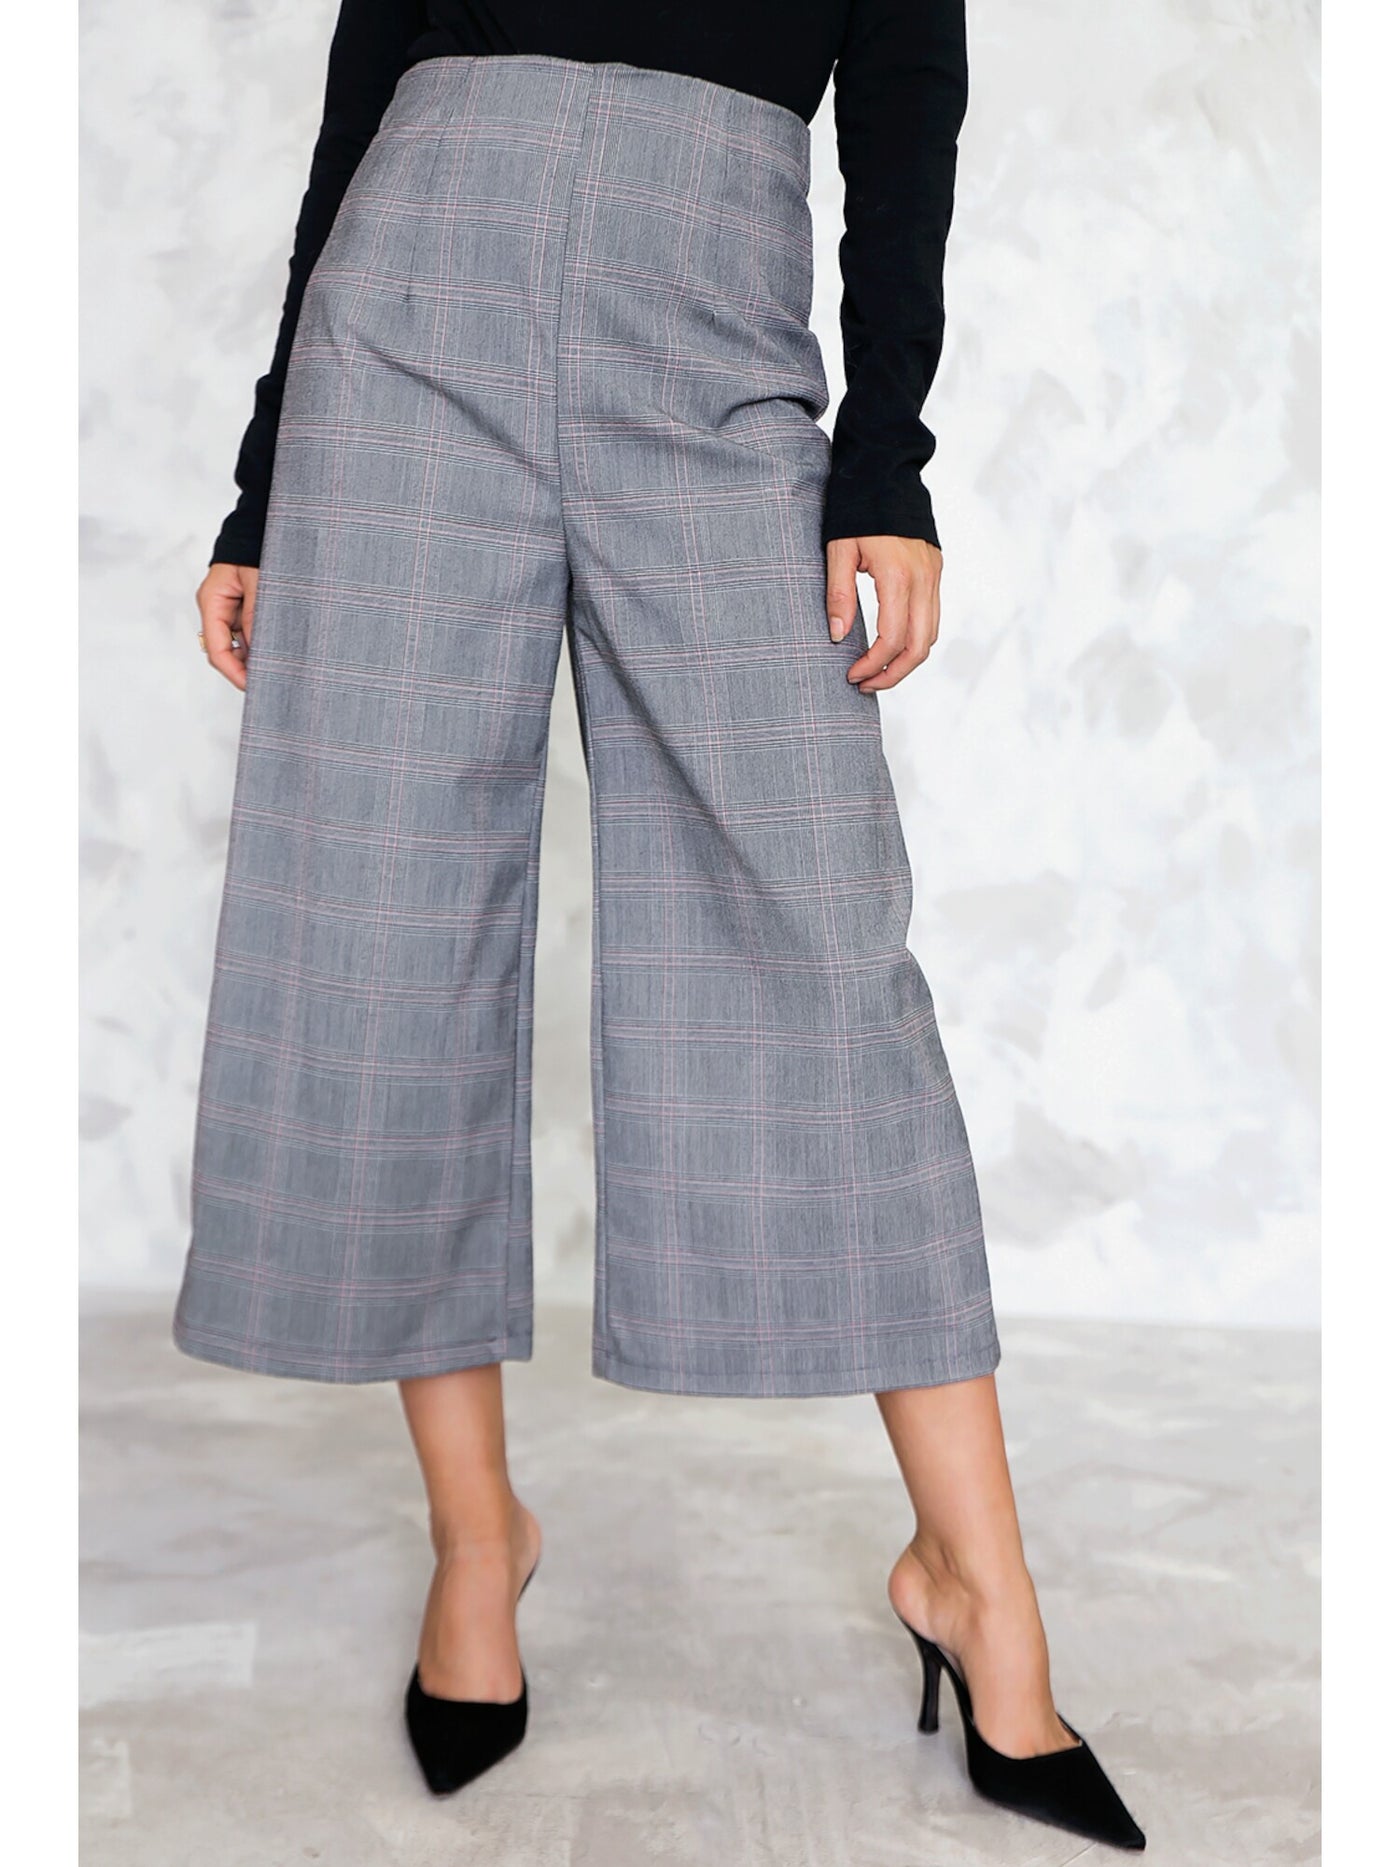 RILEY&RAE Womens Gray Stretch Zippered Pocketed Culottes Button Detail Pleated Plaid Wear To Work Pants Juniors 0